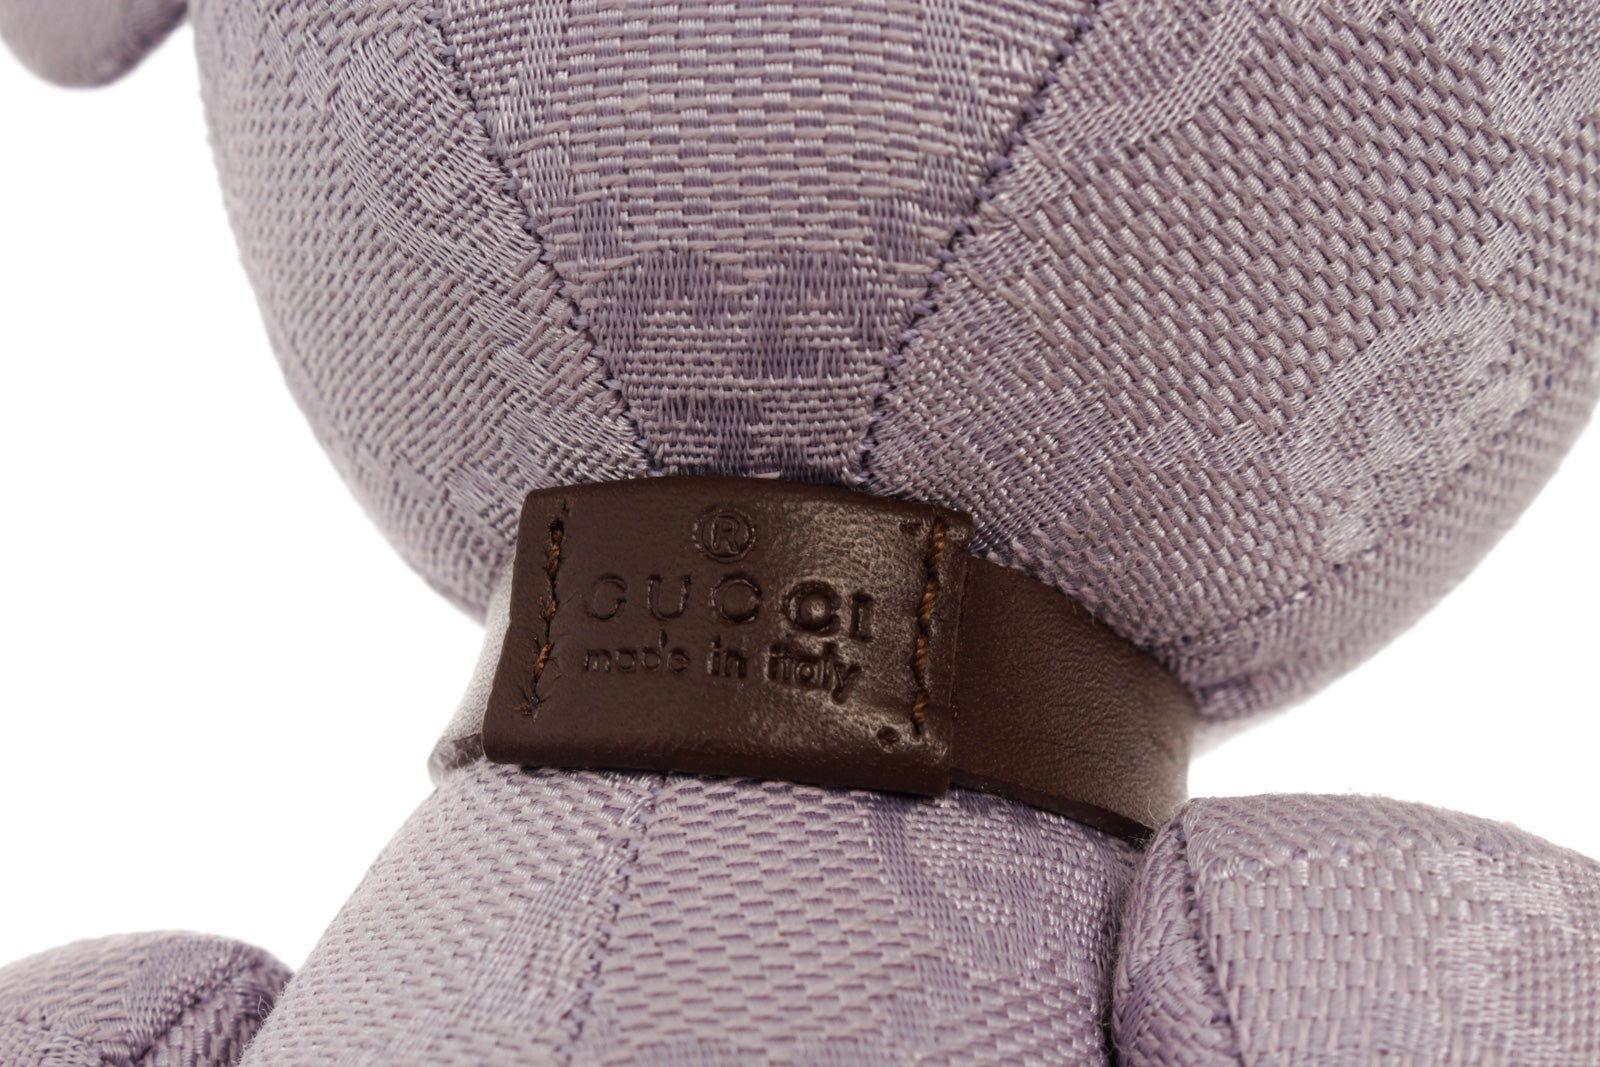 Gucci Lavender Monogram Stuffed Teddy Bear In Good Condition For Sale In Irvine, CA